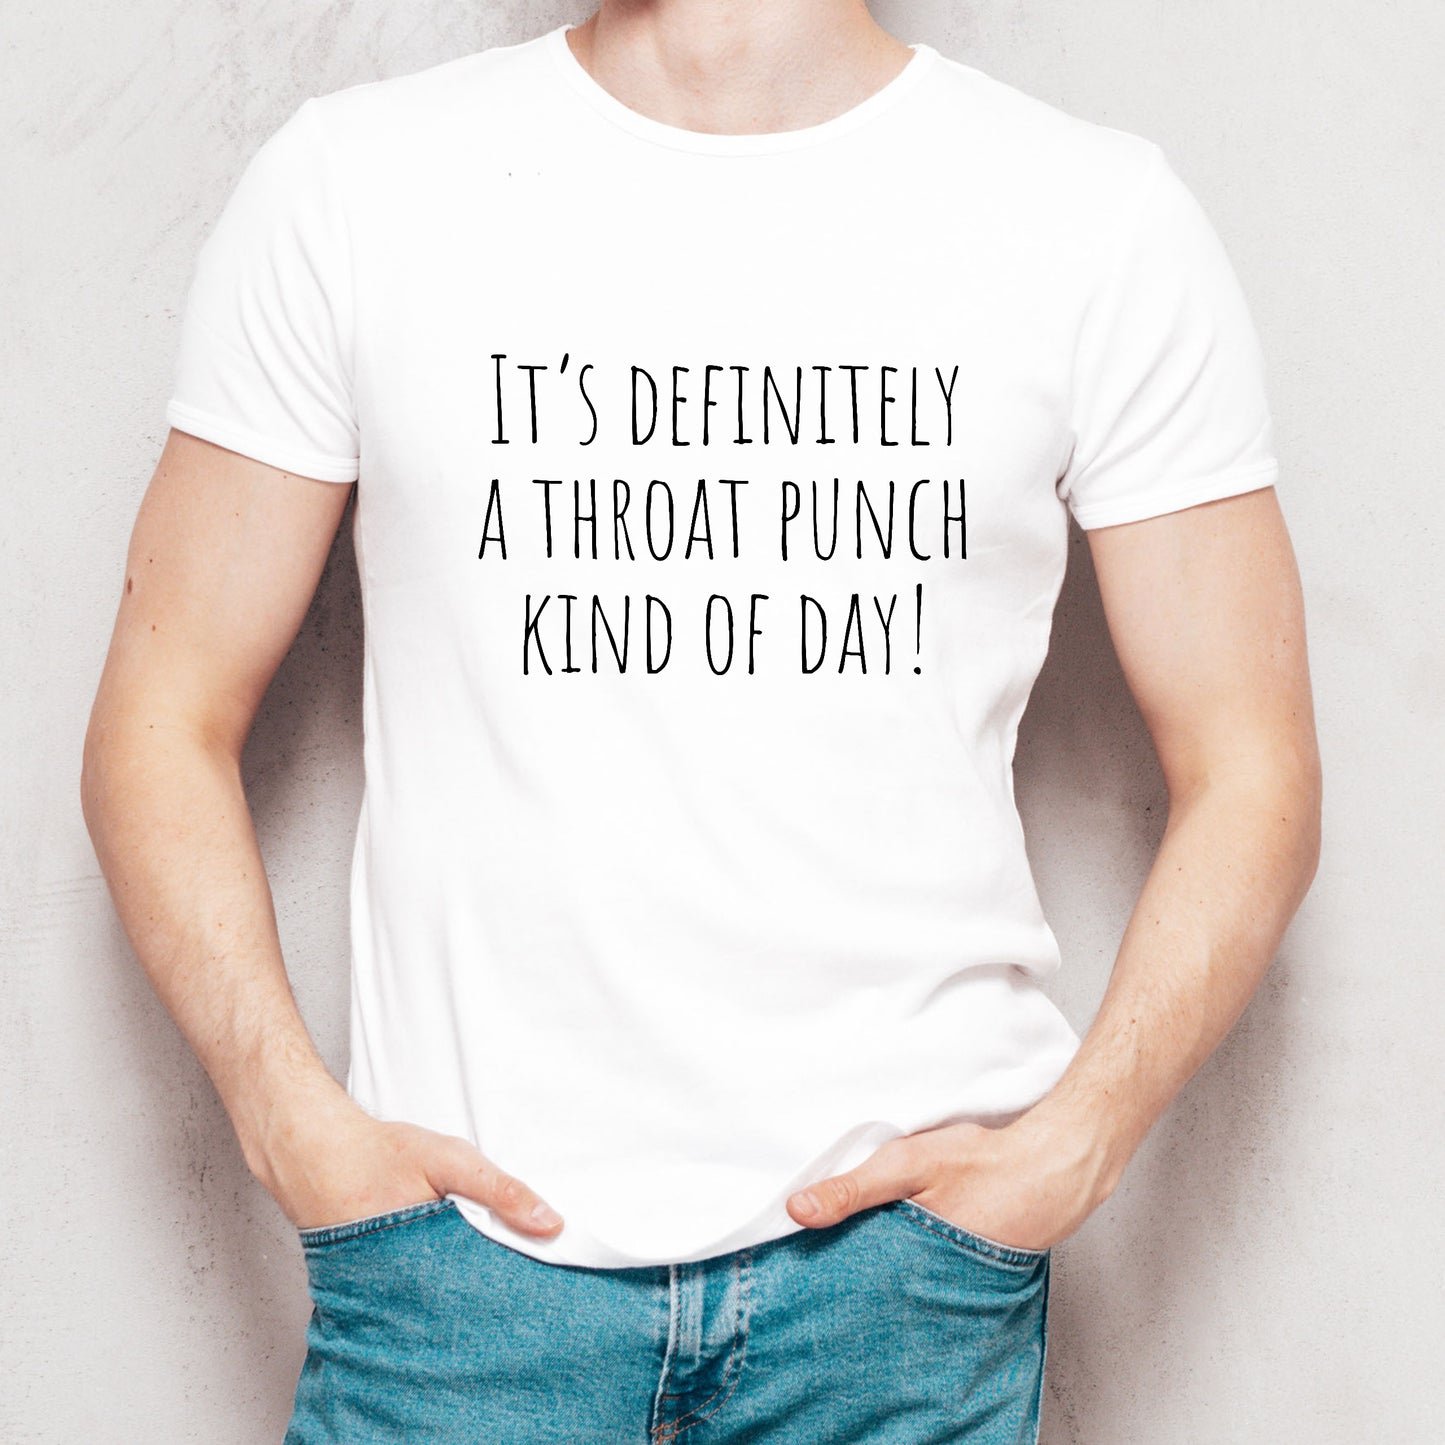 Sarcastic T-Shirt For Throat Punch T Shirt With Funny Saying TShirt For Satire TShirt Ironic Tee For Adult Comedy Shirt For Sarcastic Gift